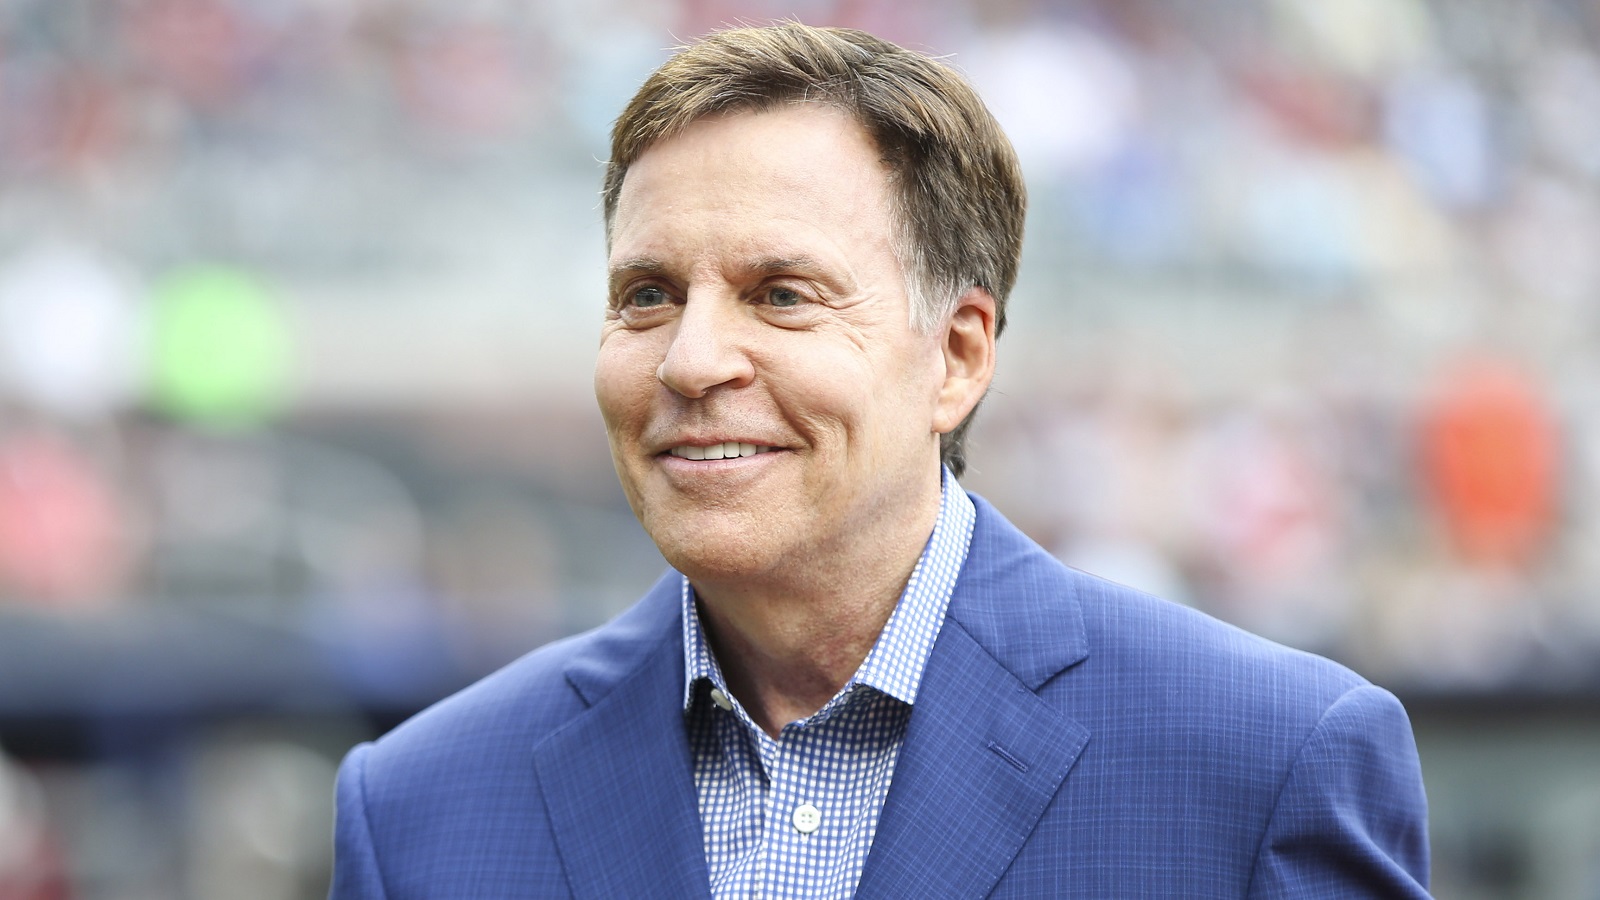 Bob Costas made embarrassing Yankees mistake during ALDS Game 5